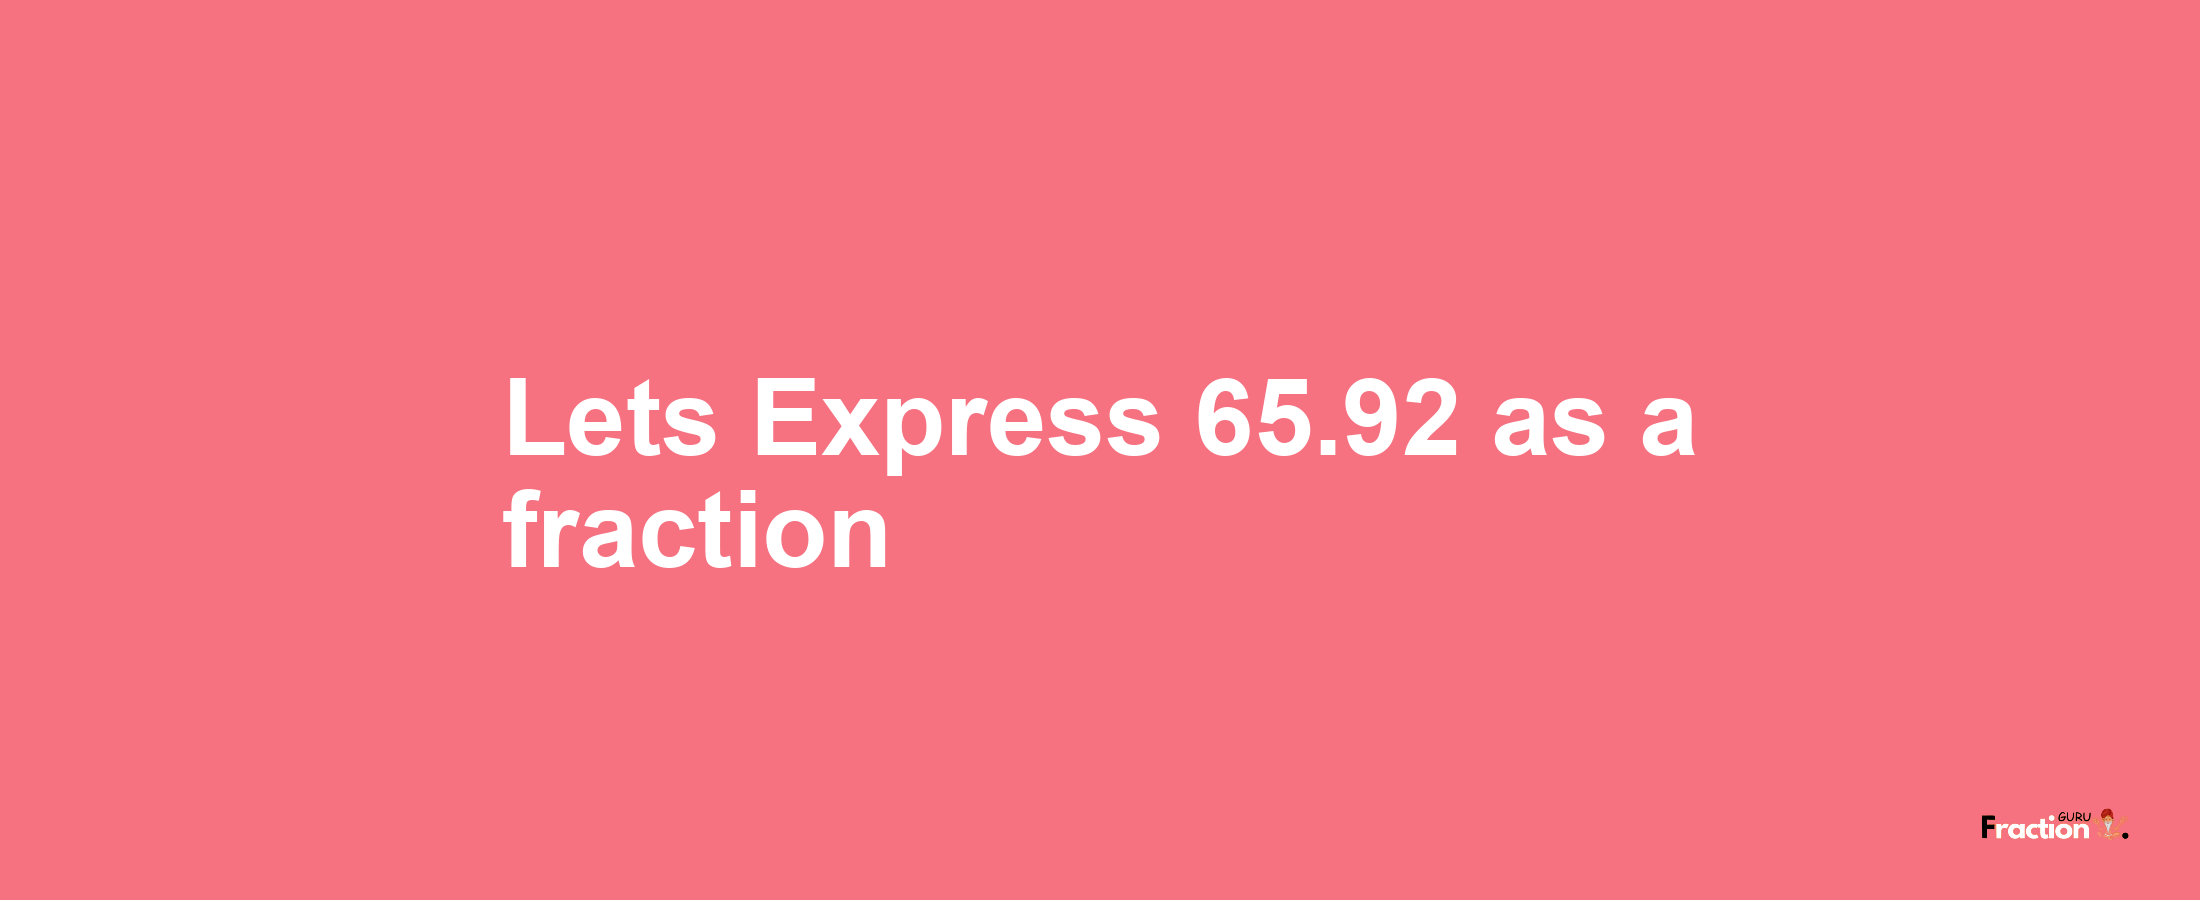 Lets Express 65.92 as afraction